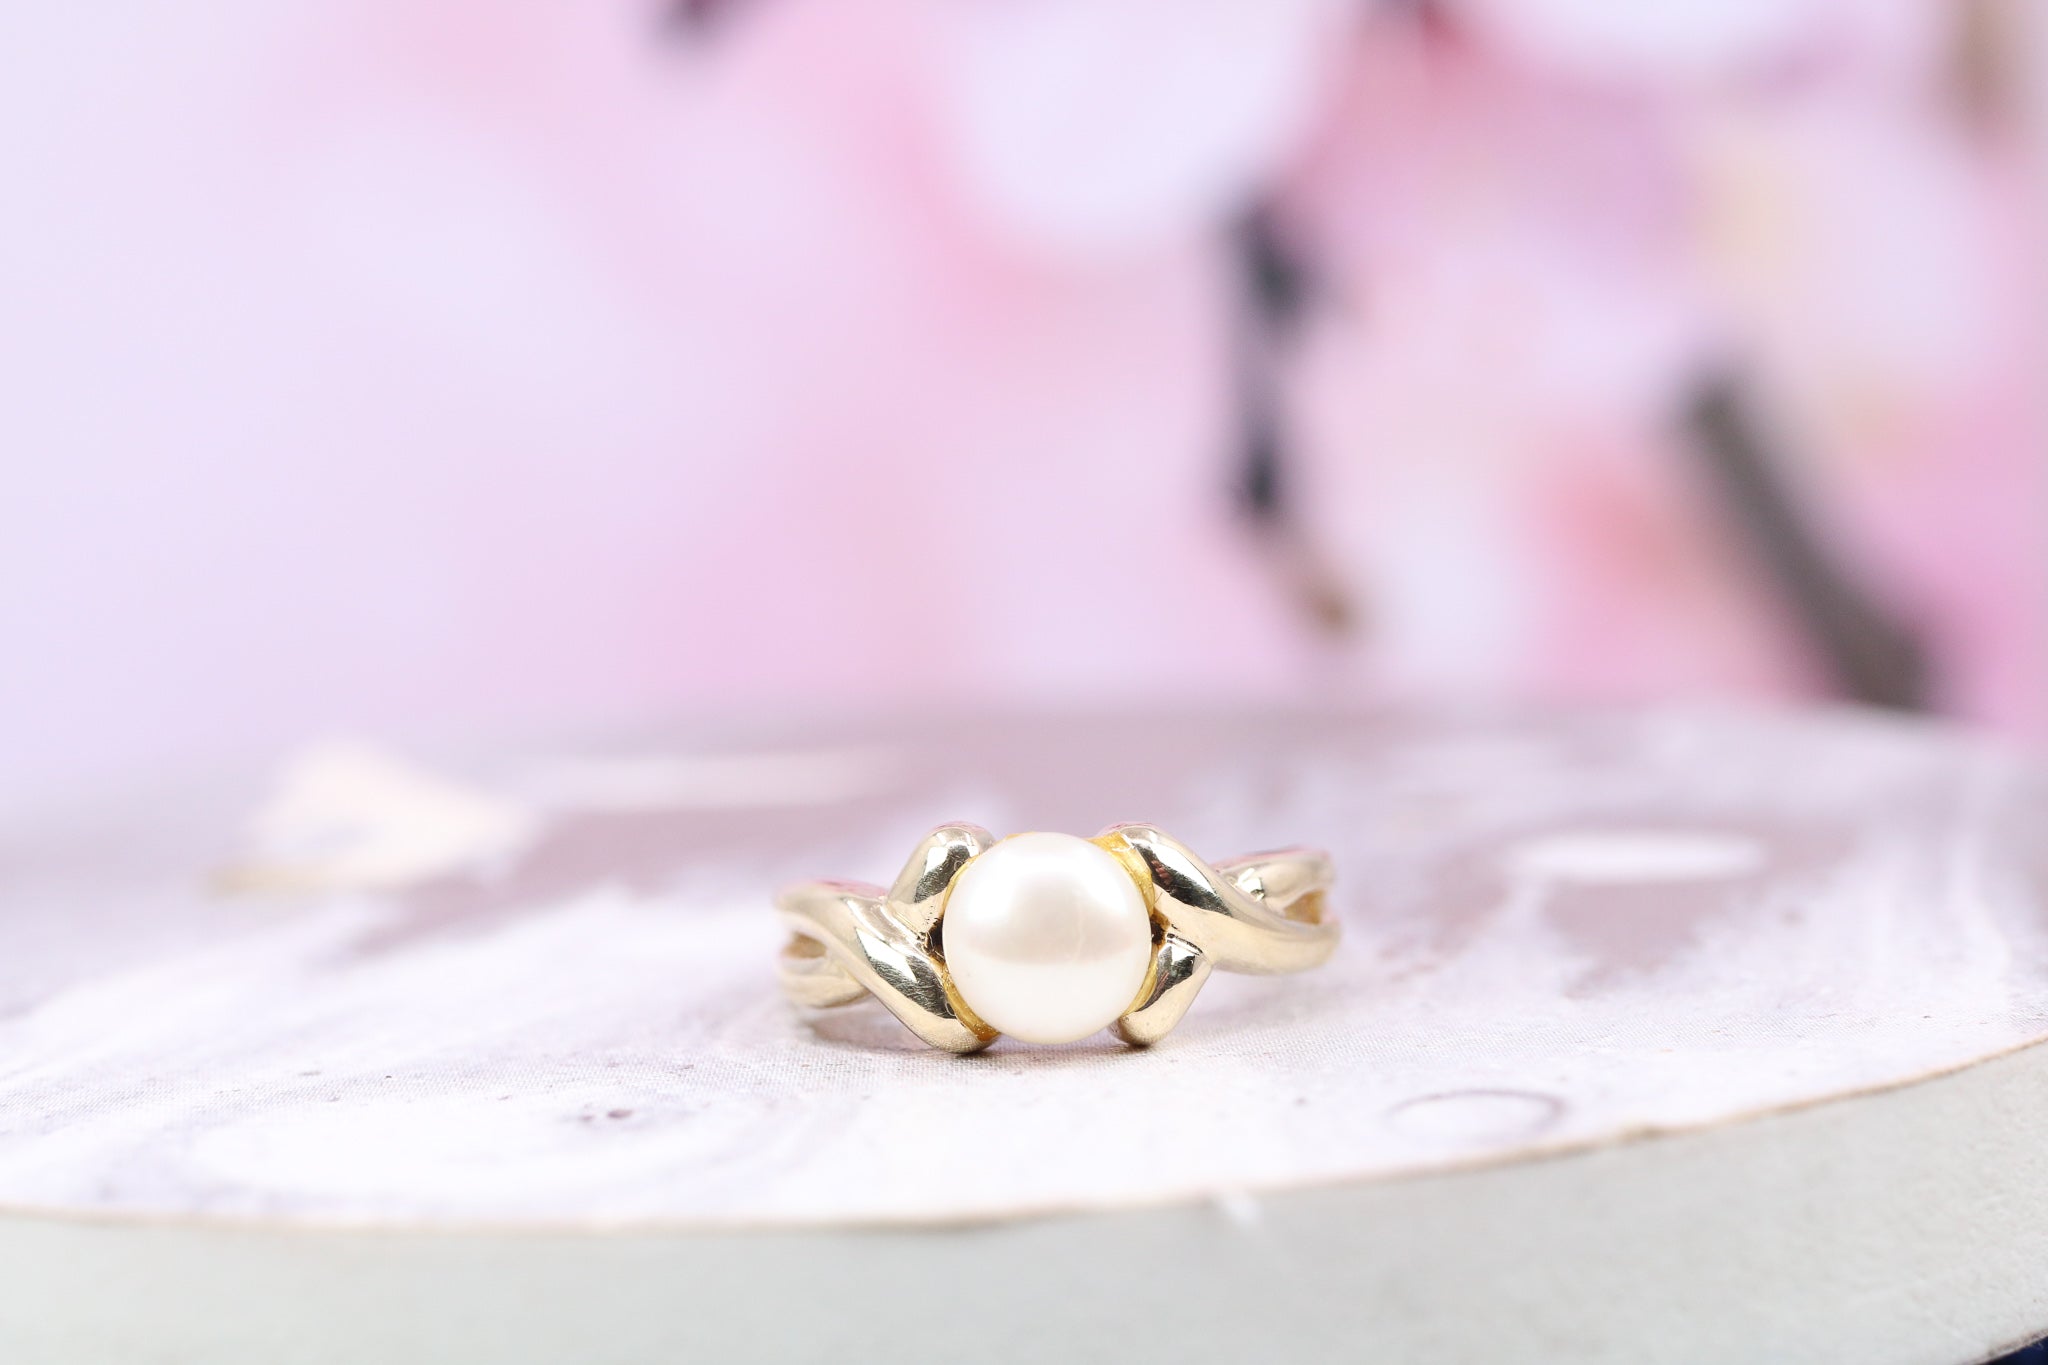 9ct Yellow Gold & Pearl Ring - HJ2740 - Hallmark Jewellers Formby & The Jewellers Bench Widnes